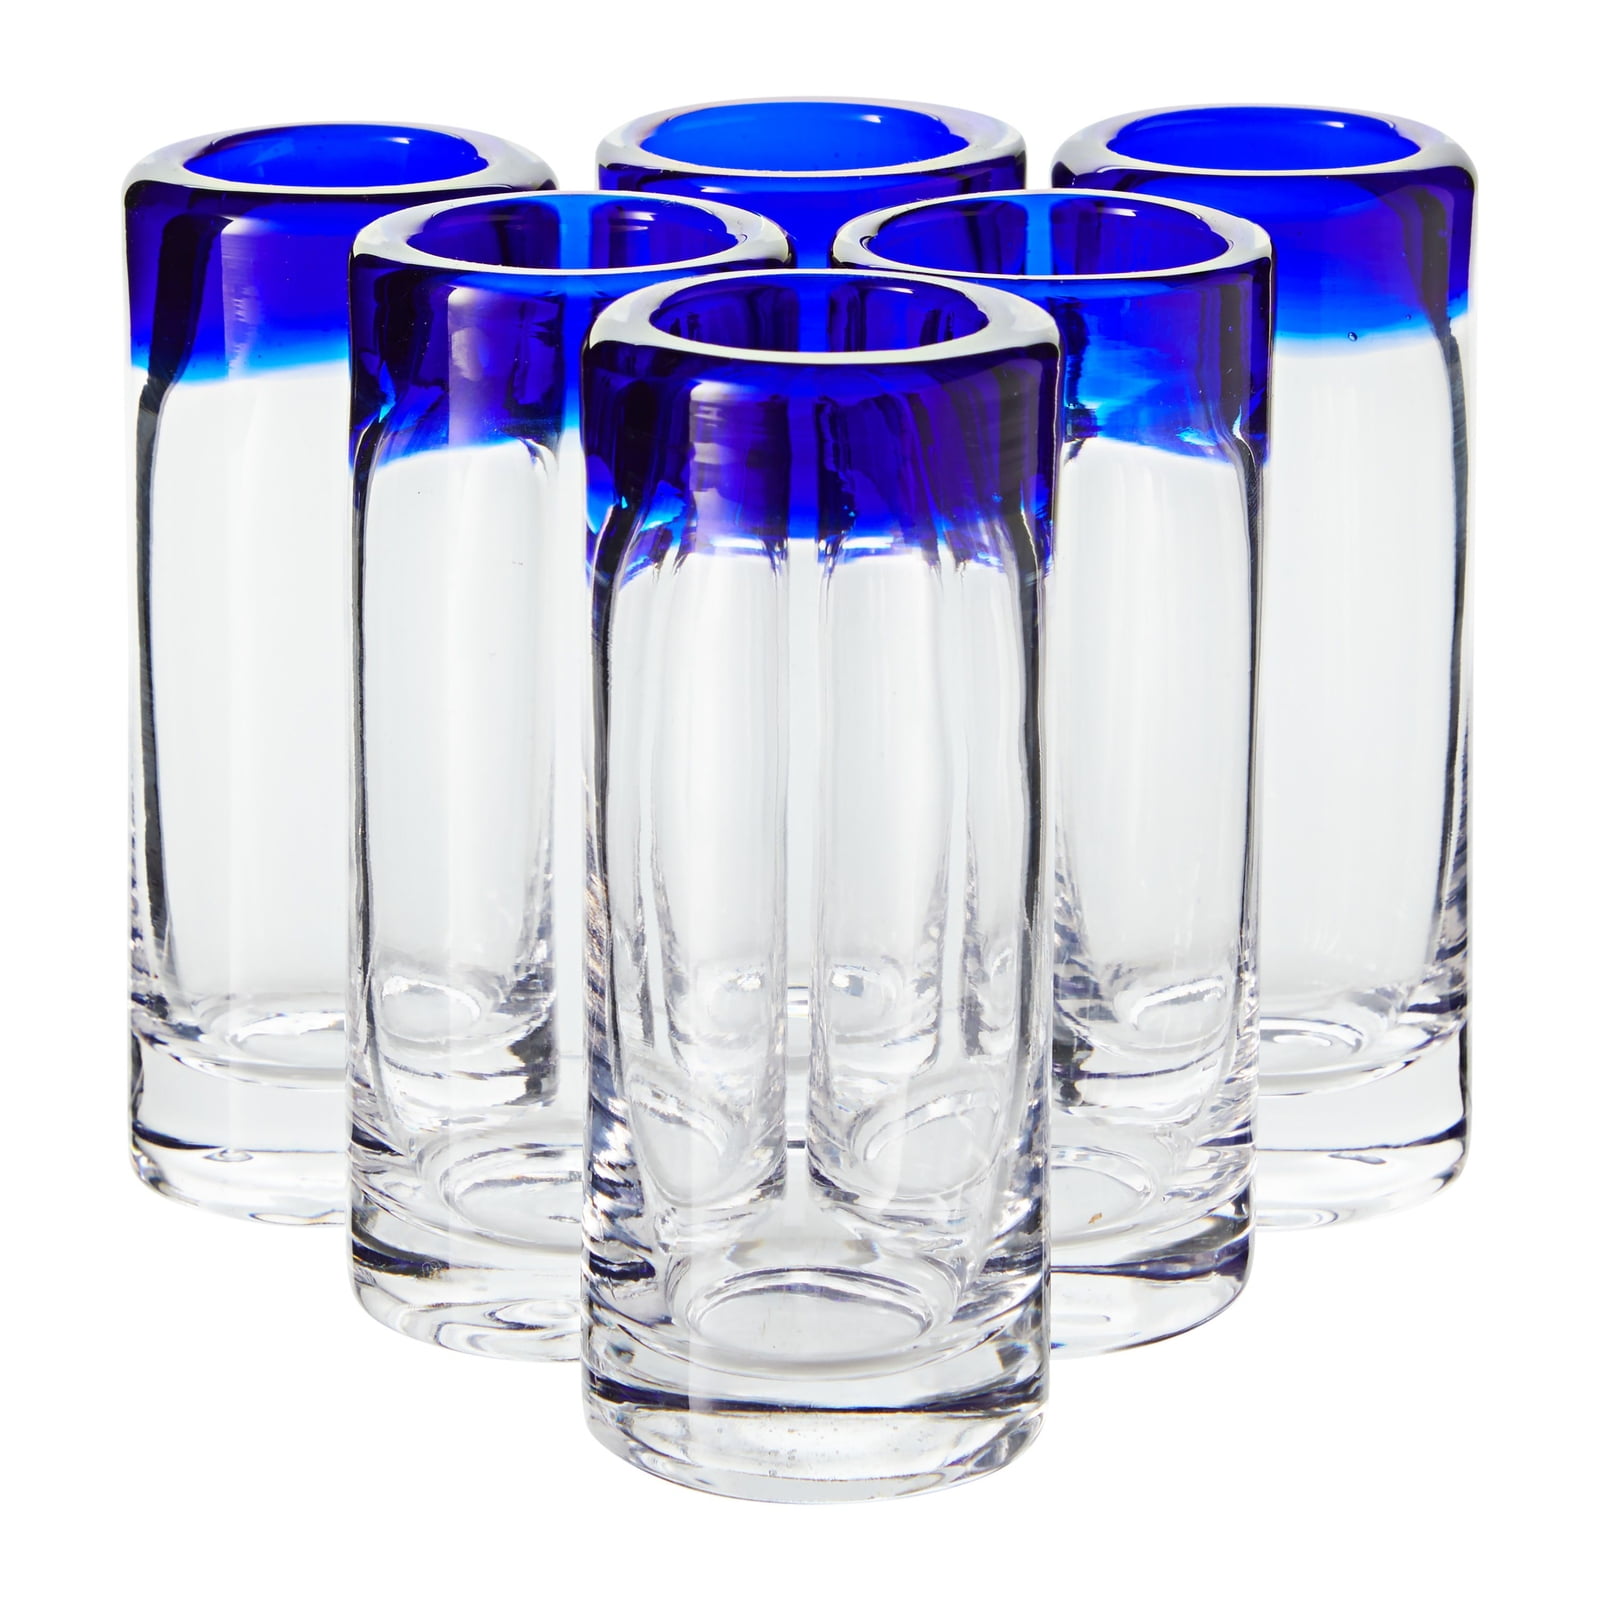 Mexican Beer Glasses with Cobalt Handle and Rim (Set of 6